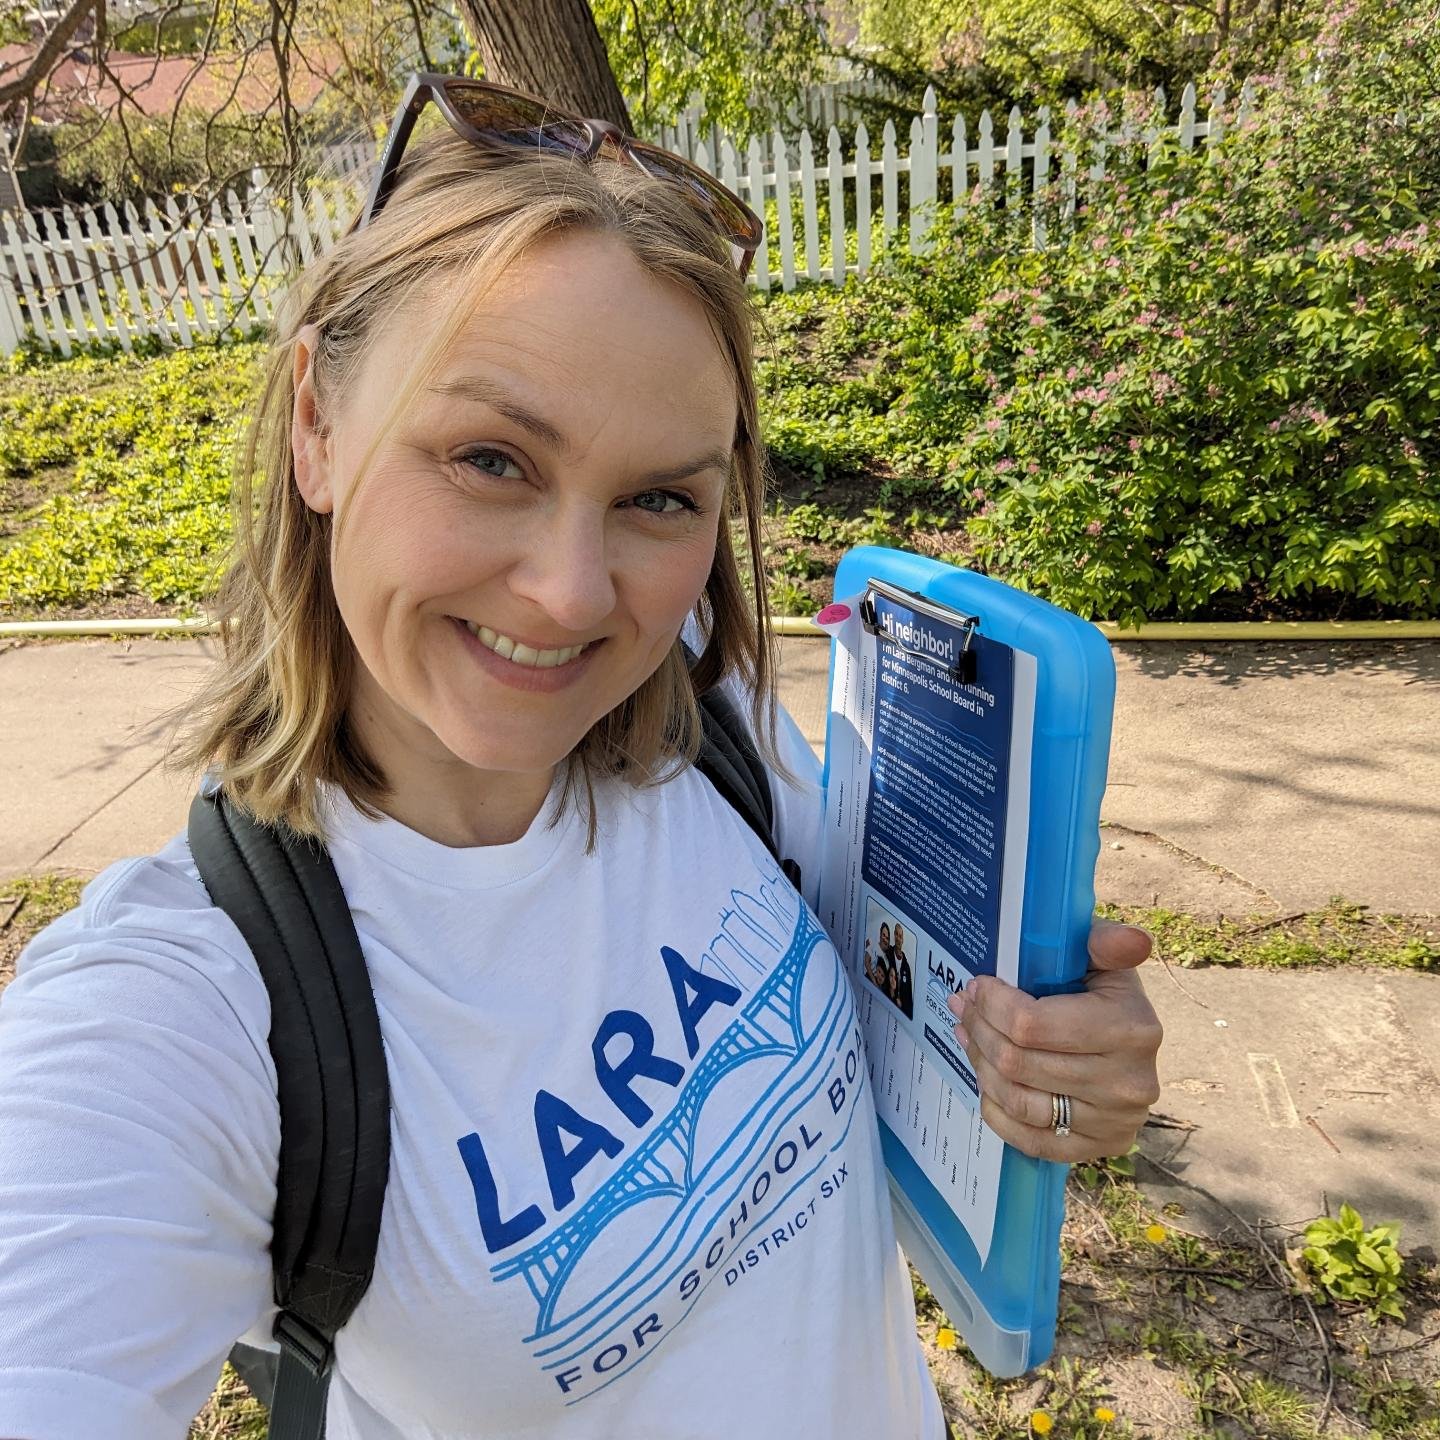 Door knocking and garage sale-ing!? Count me in! Happy to be out talking to neighbors in Linden Hills today and grabbing a few treasures along the way ☀️ #mpsproud #district6 #lara4schoolboard